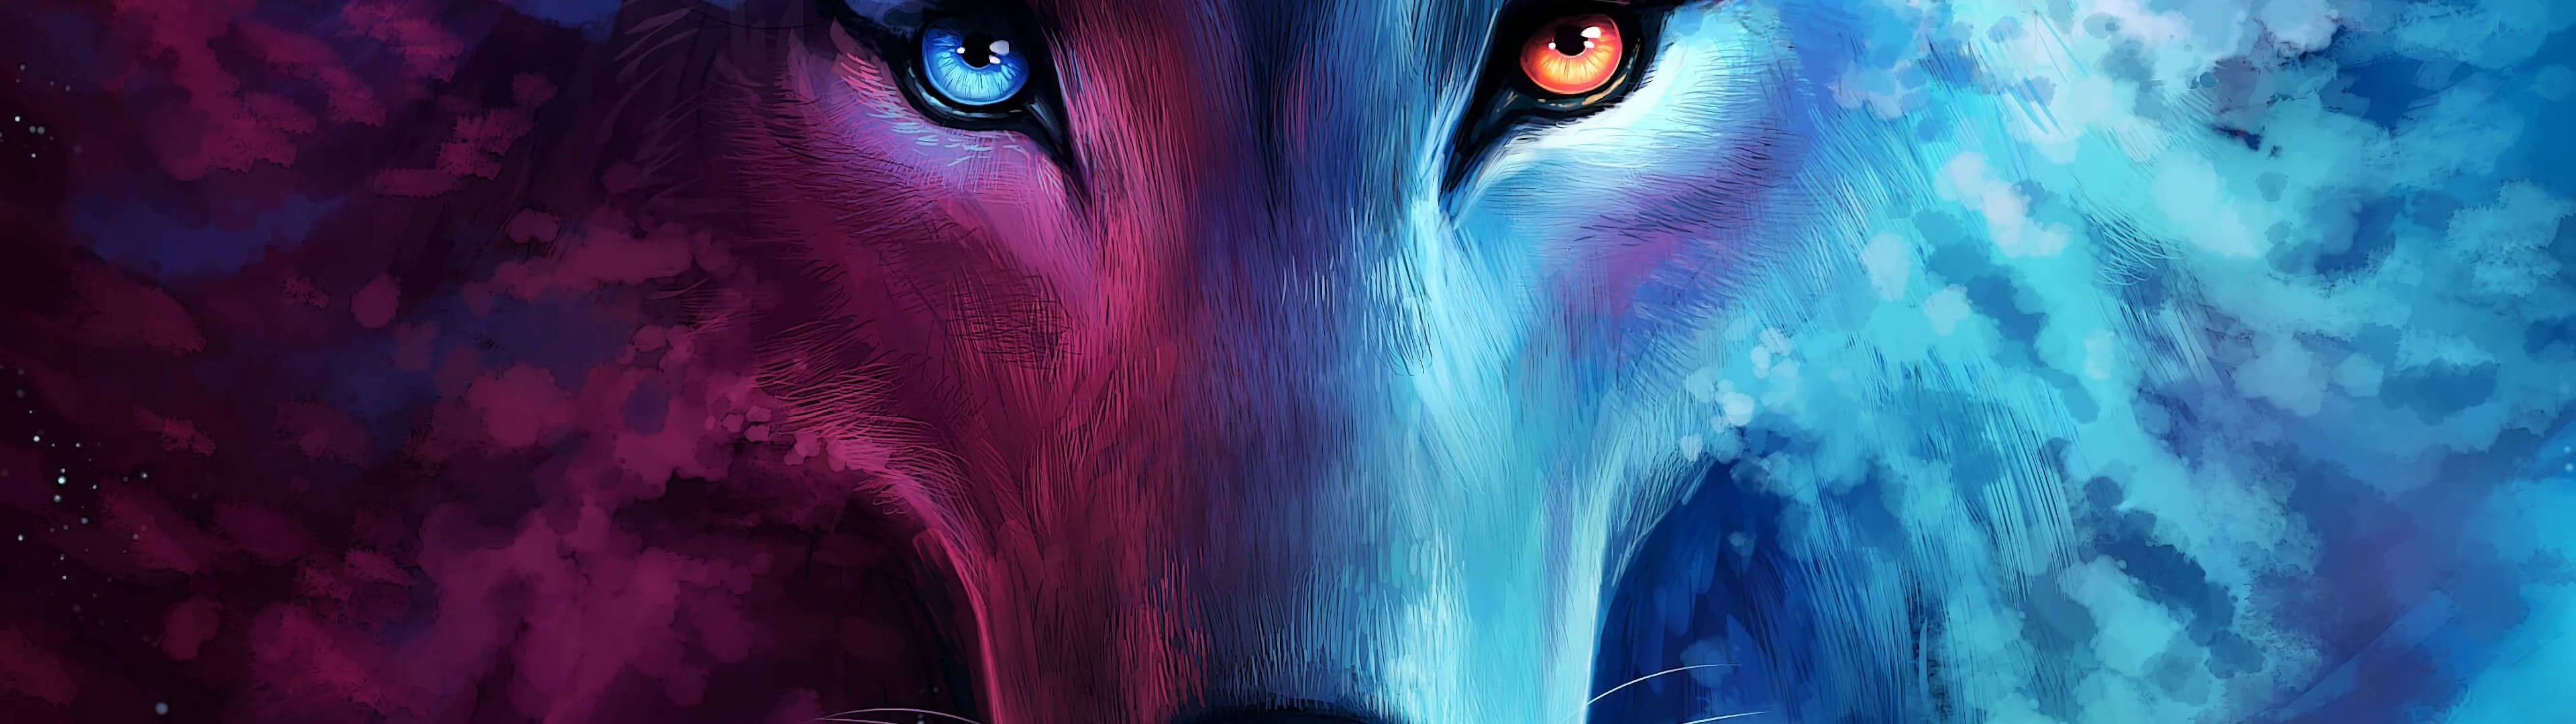 3840x1080 4k Colorful Wolf